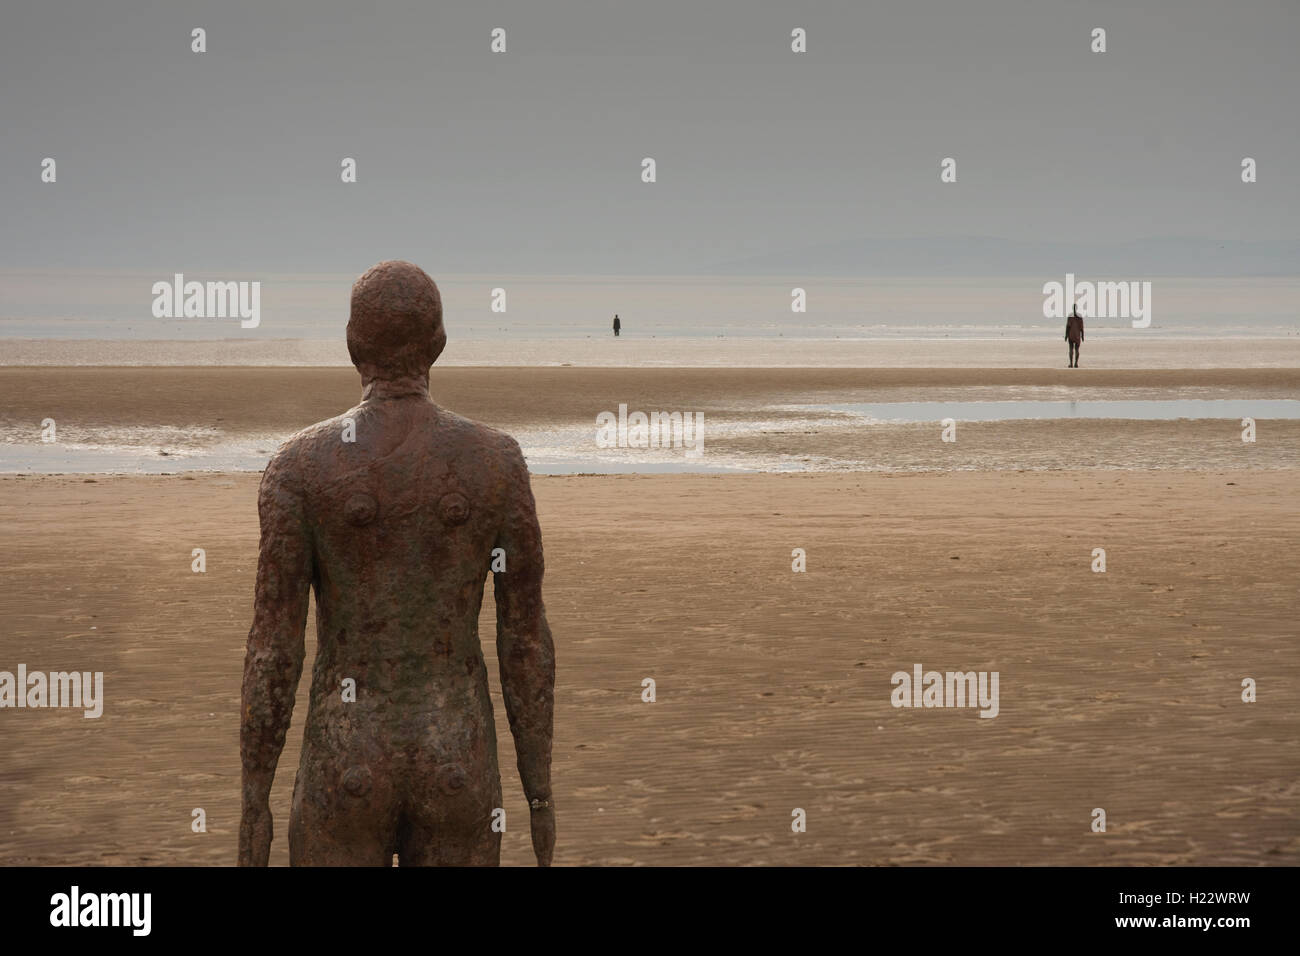 UK, Merseyside, Crosby, Crosby Beach, Anthony Gormley’s Another Place artwork - statues Stock Photo